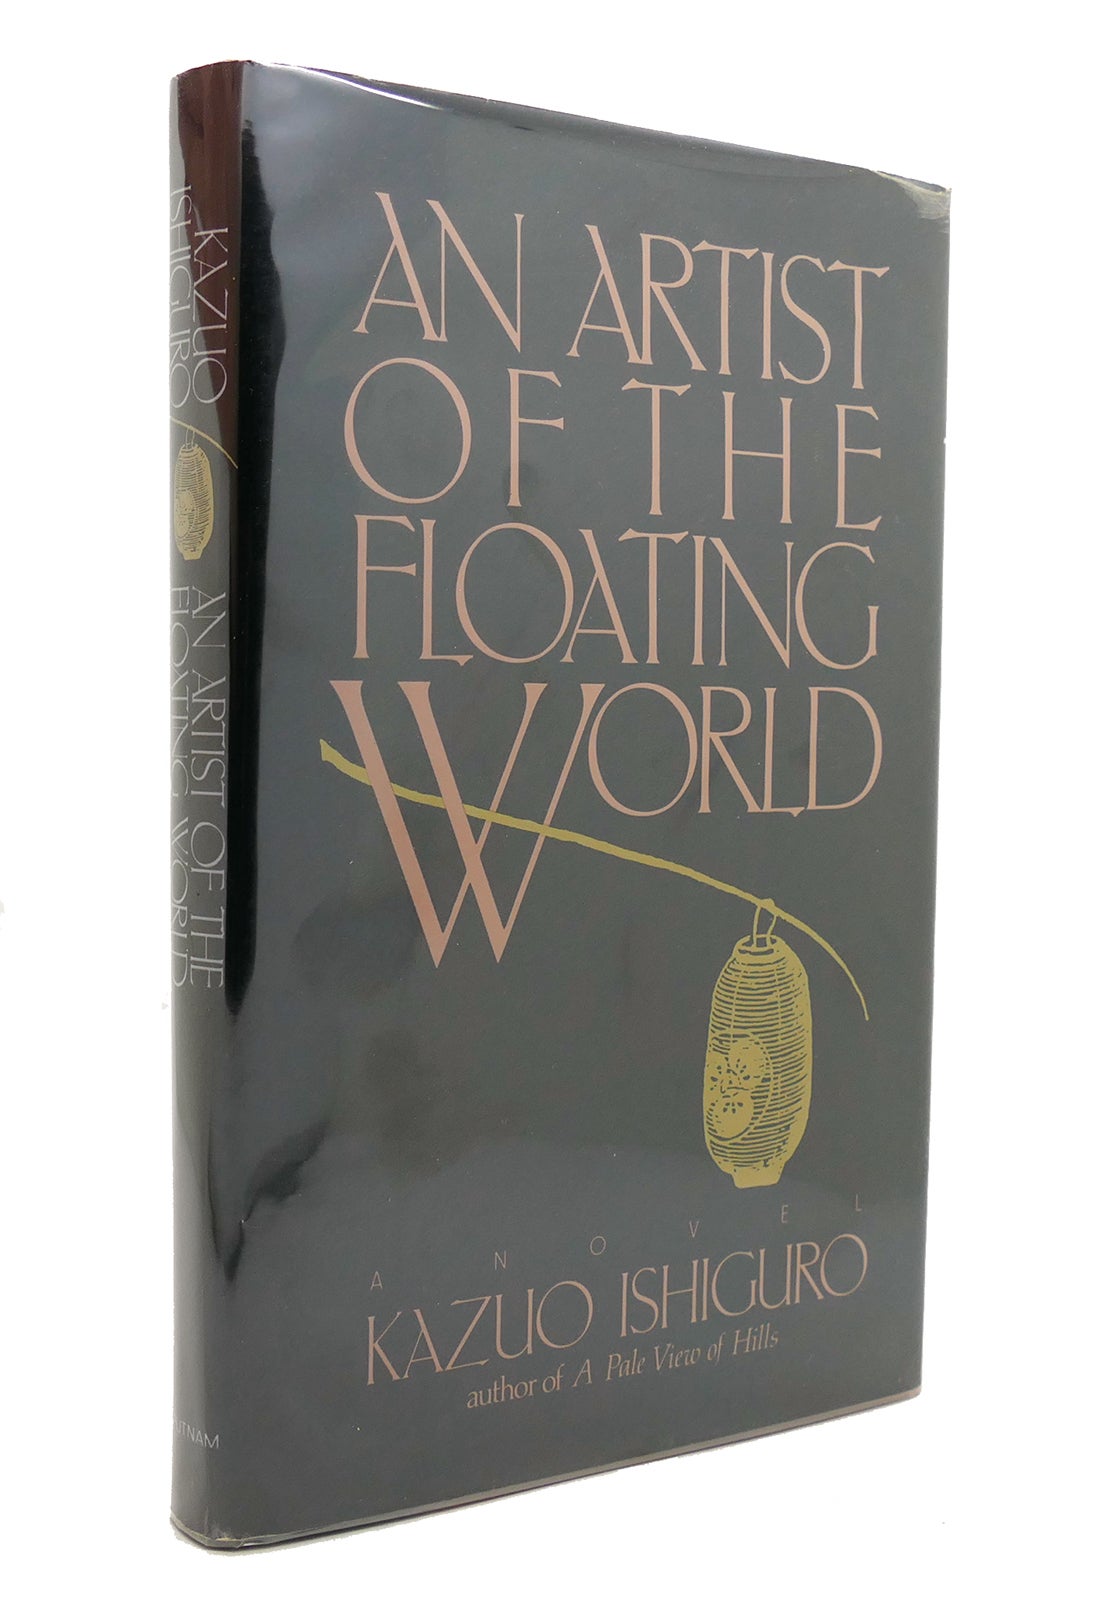 essays in an artist of the floating world